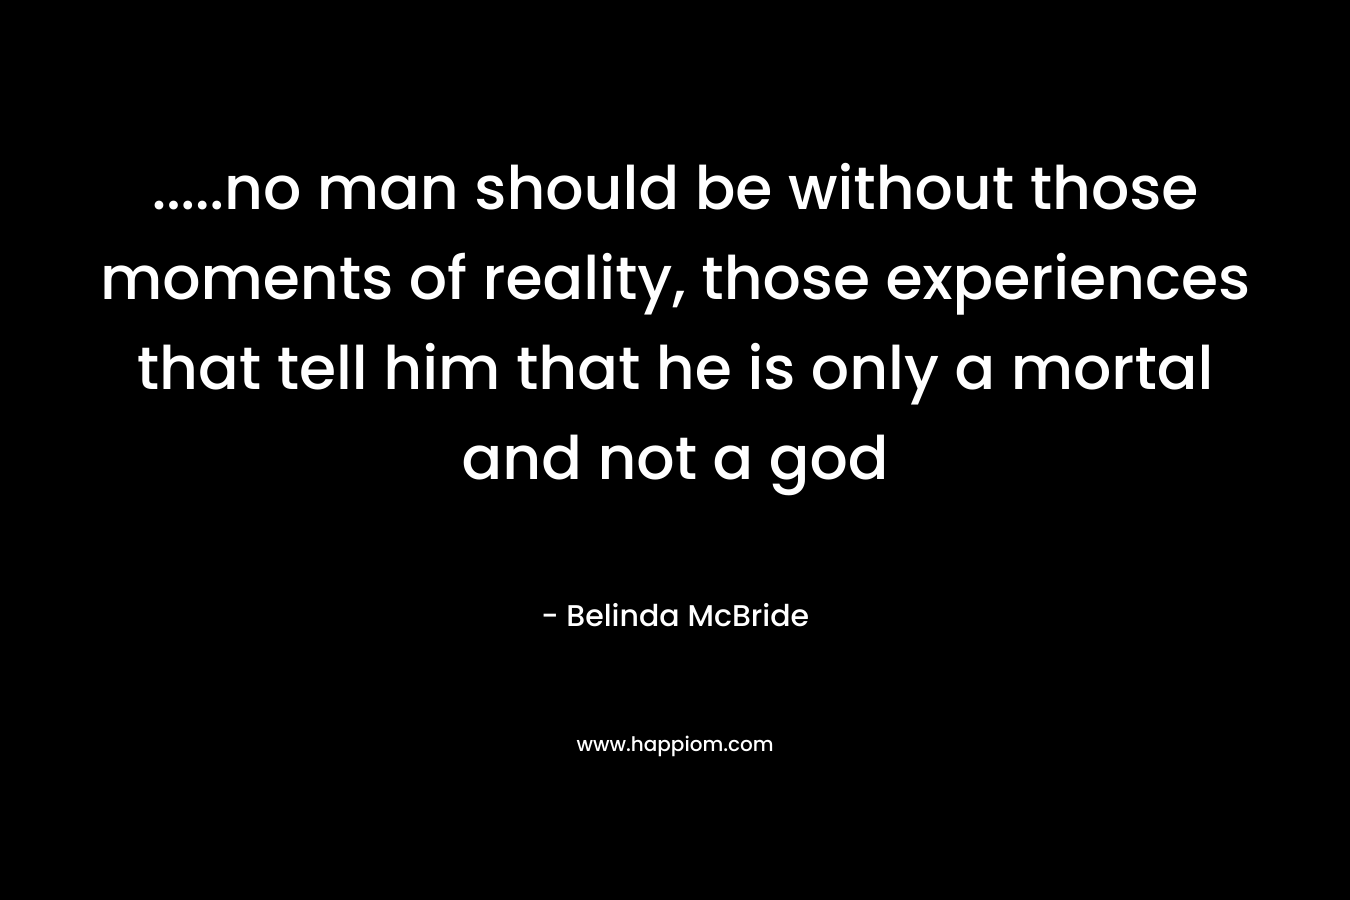 .....no man should be without those moments of reality, those experiences that tell him that he is only a mortal and not a god